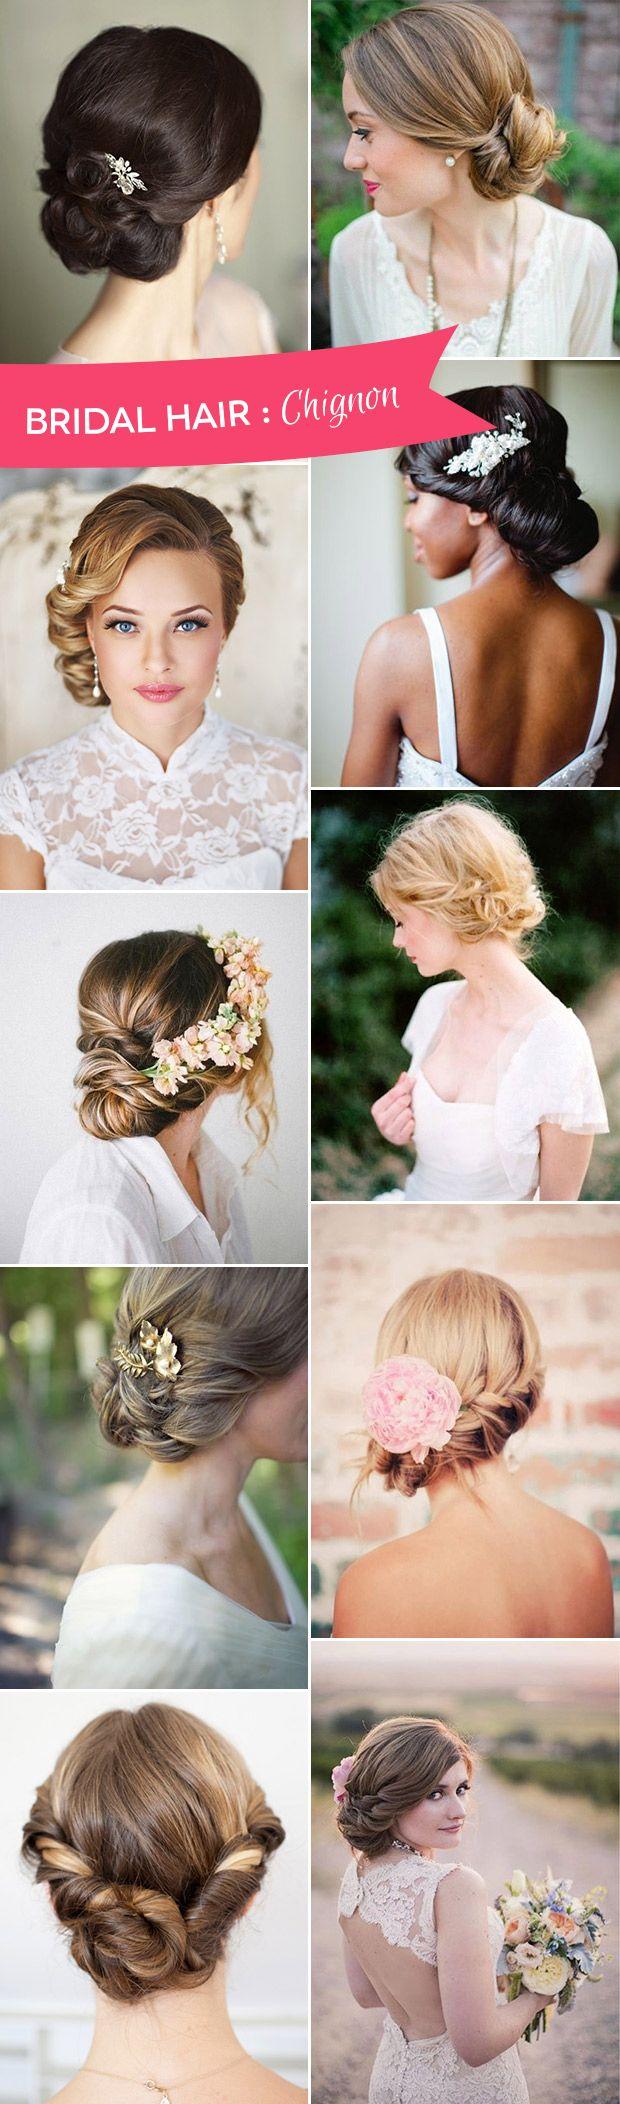 Hochzeit - The Charm Of Chignons - The Simplest Wedding Hairstyle